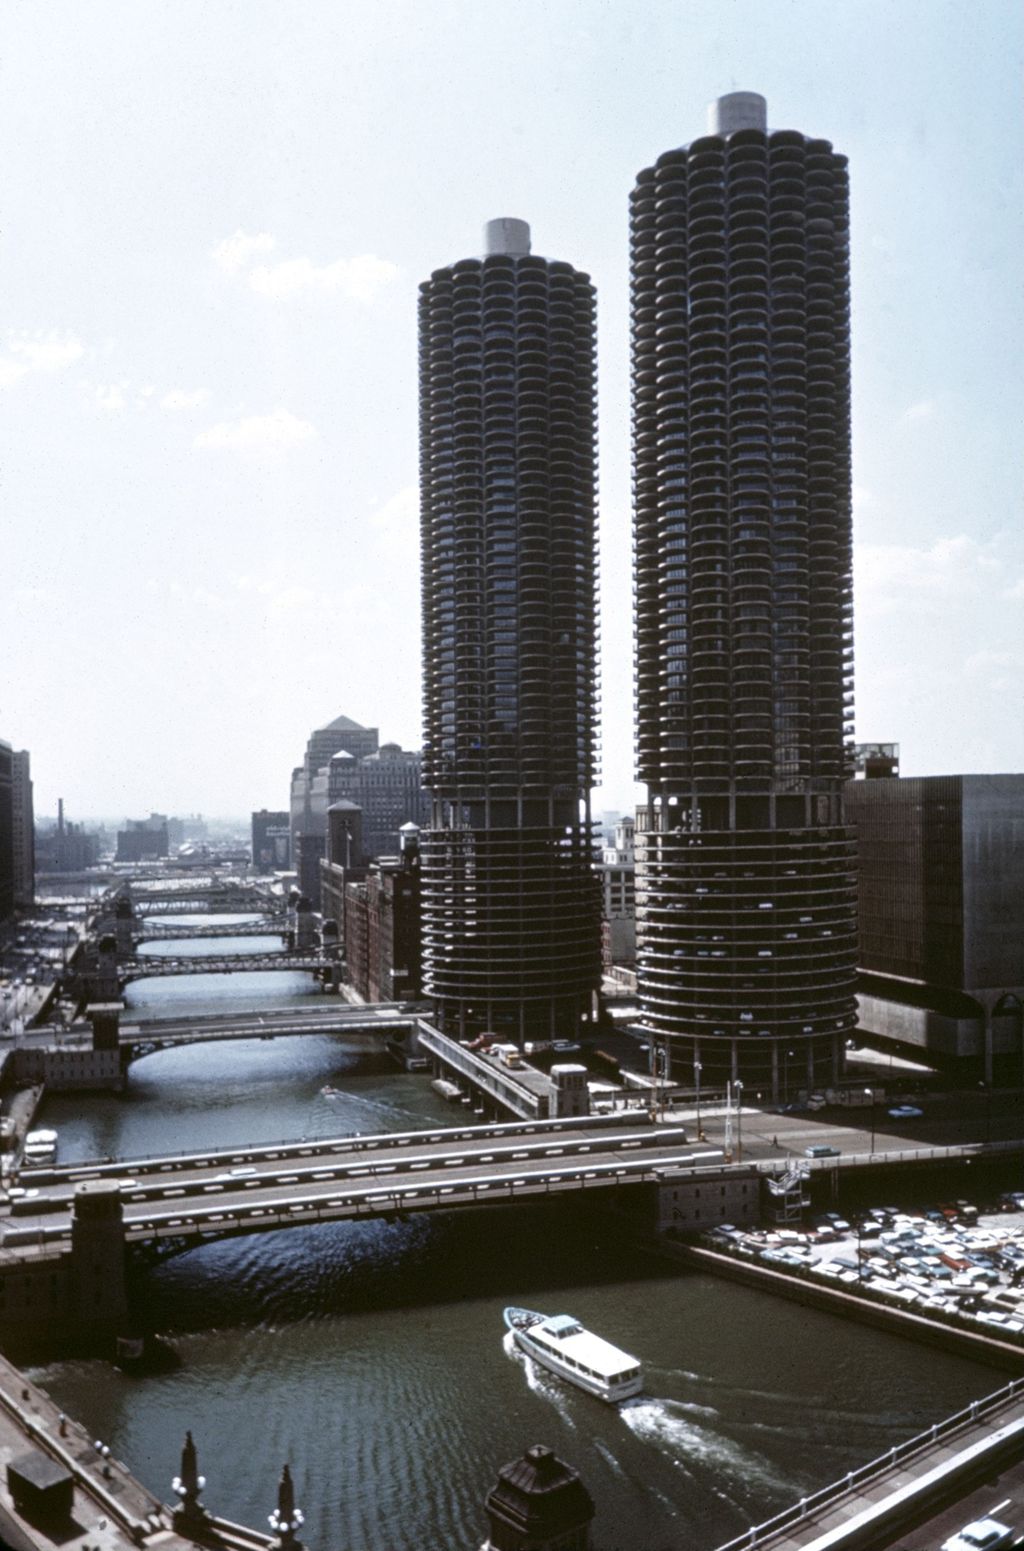 Miniature of Marina City and Chicago River